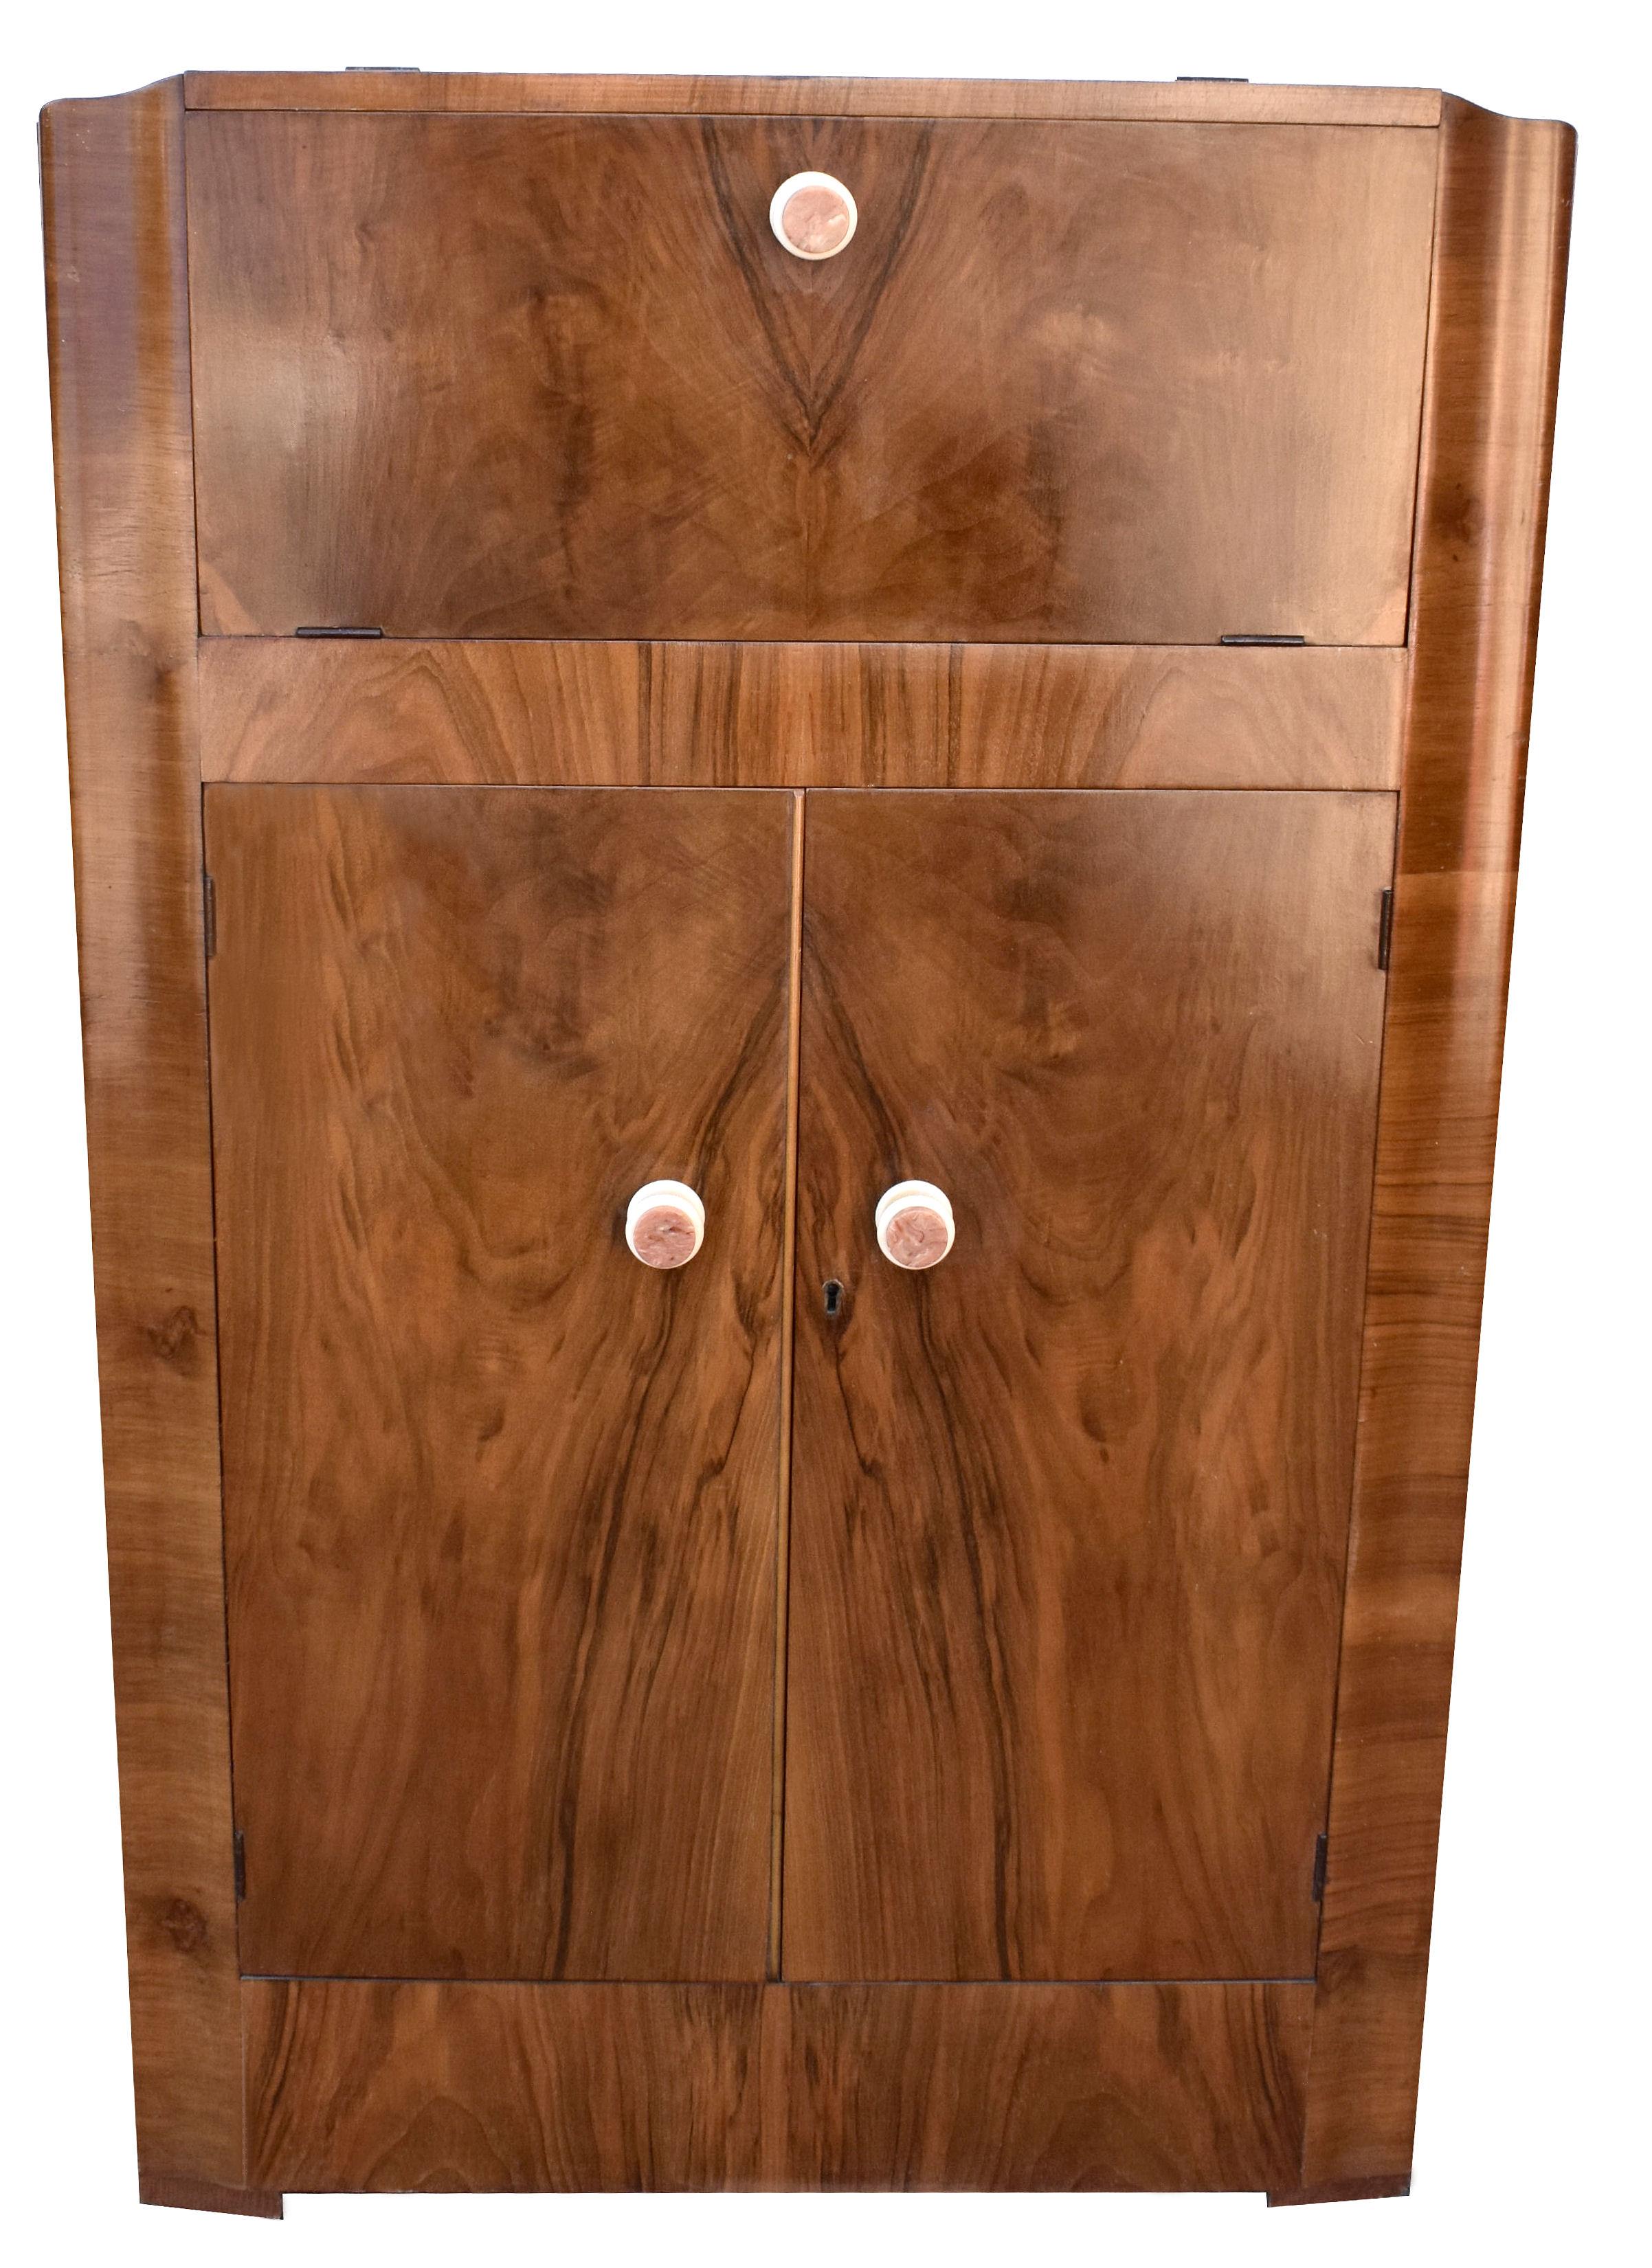 Beautiful 1930's English Art Deco walnut upright cocktail cabinet, dry bar, every home should have one of these ! Features a drop down top which reveals a mirrored interior and storage for bottles and glasses. A generously sized cupboard below